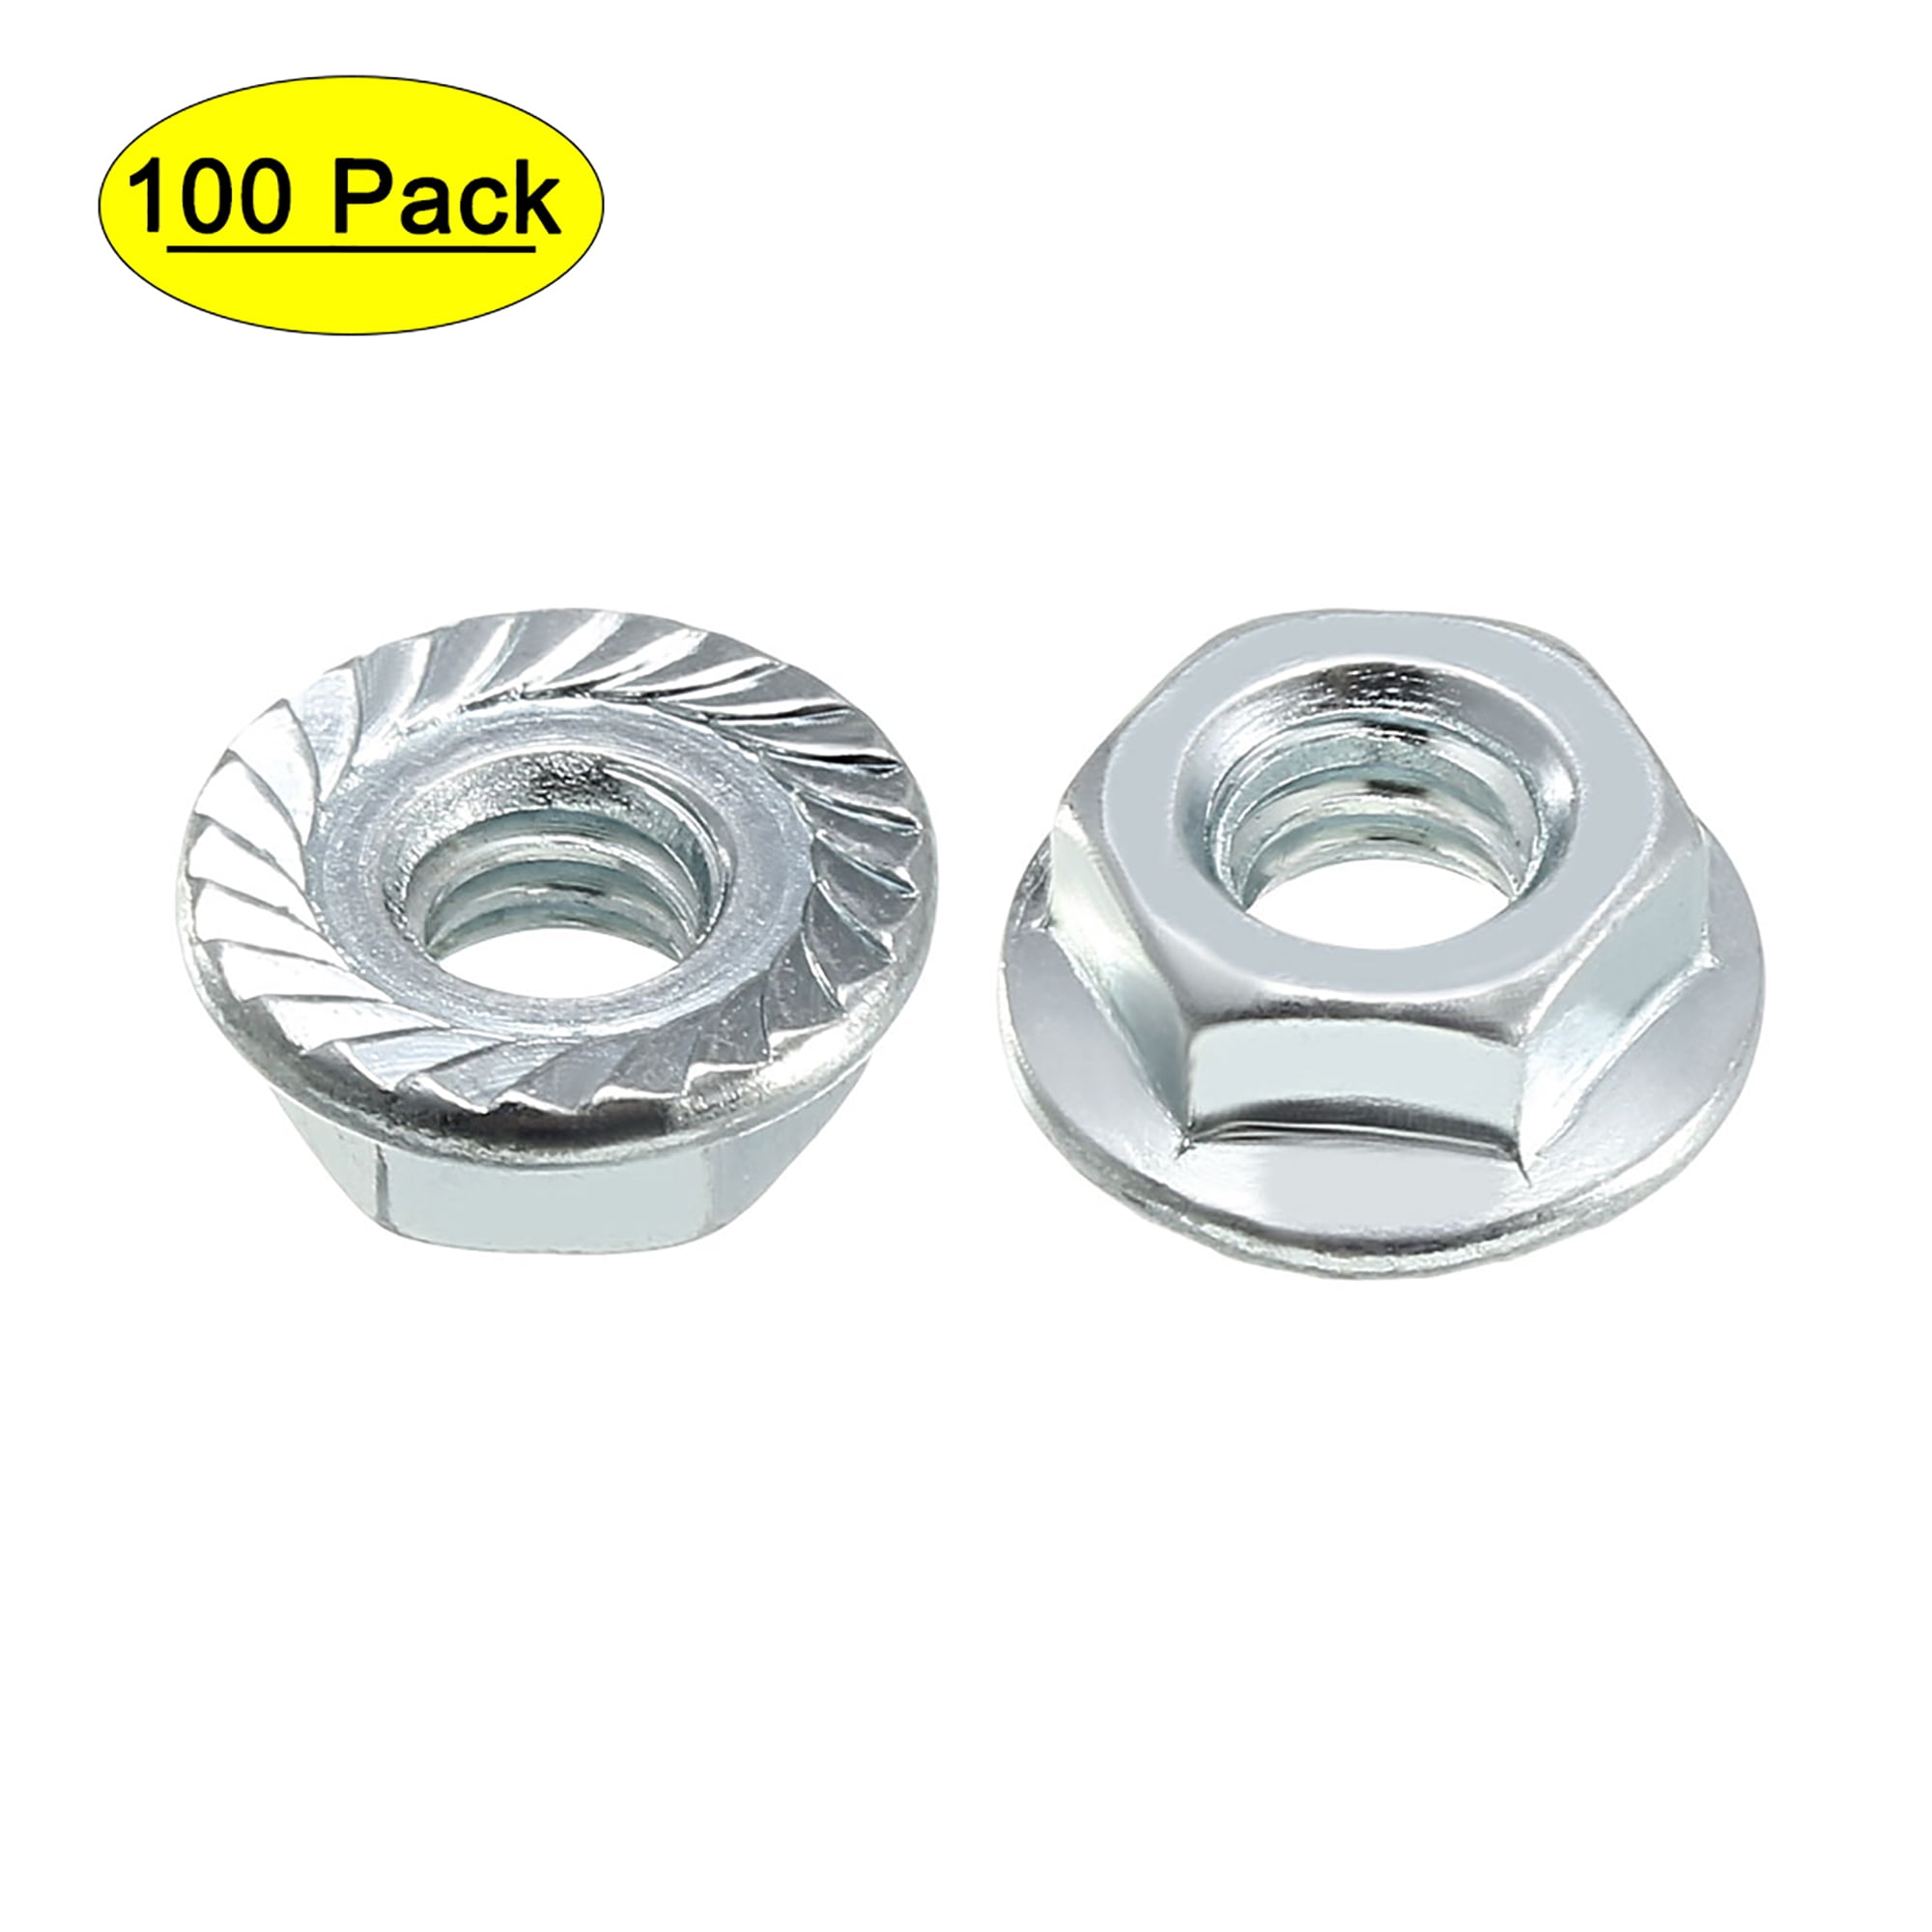 YOUR CHOICE   1/4-20 STAINLESS STEEL SERRATED FLANGE NUTS 